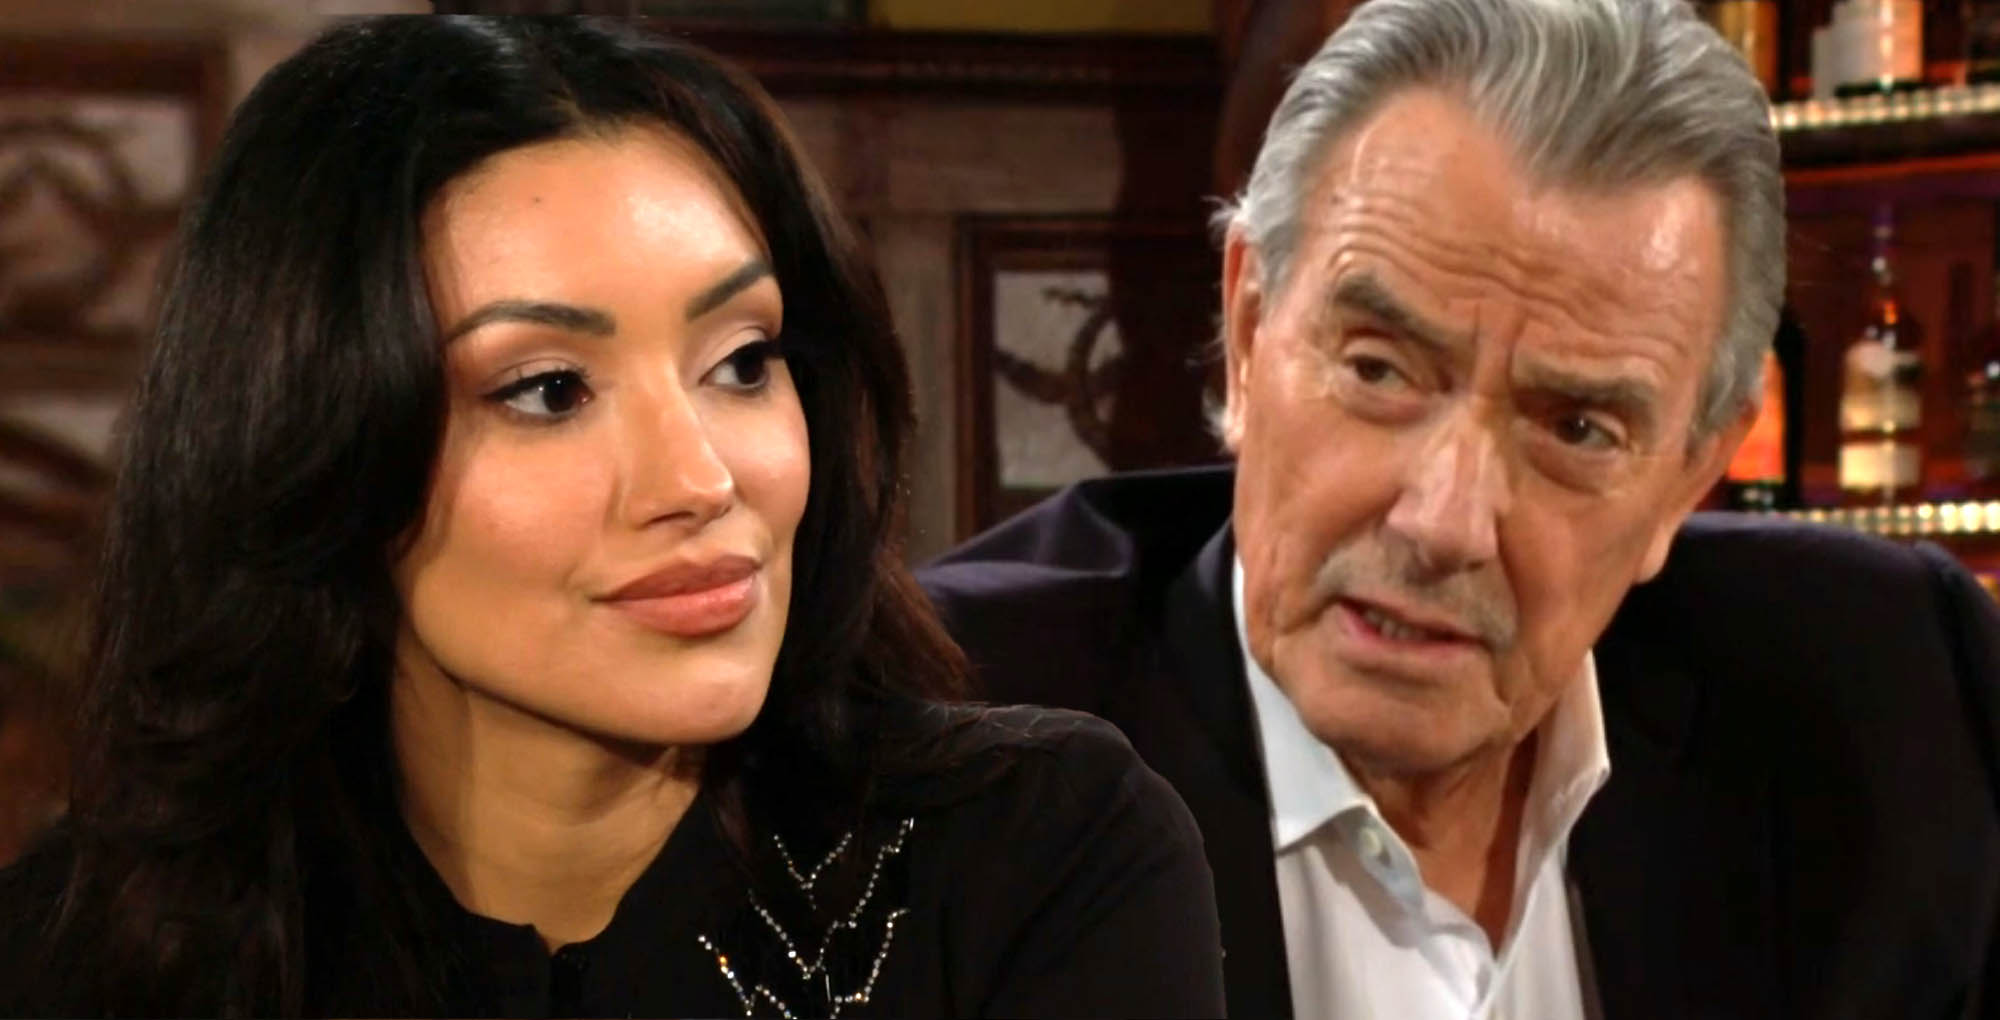 will y&r spoilers tease more of audra and victor?